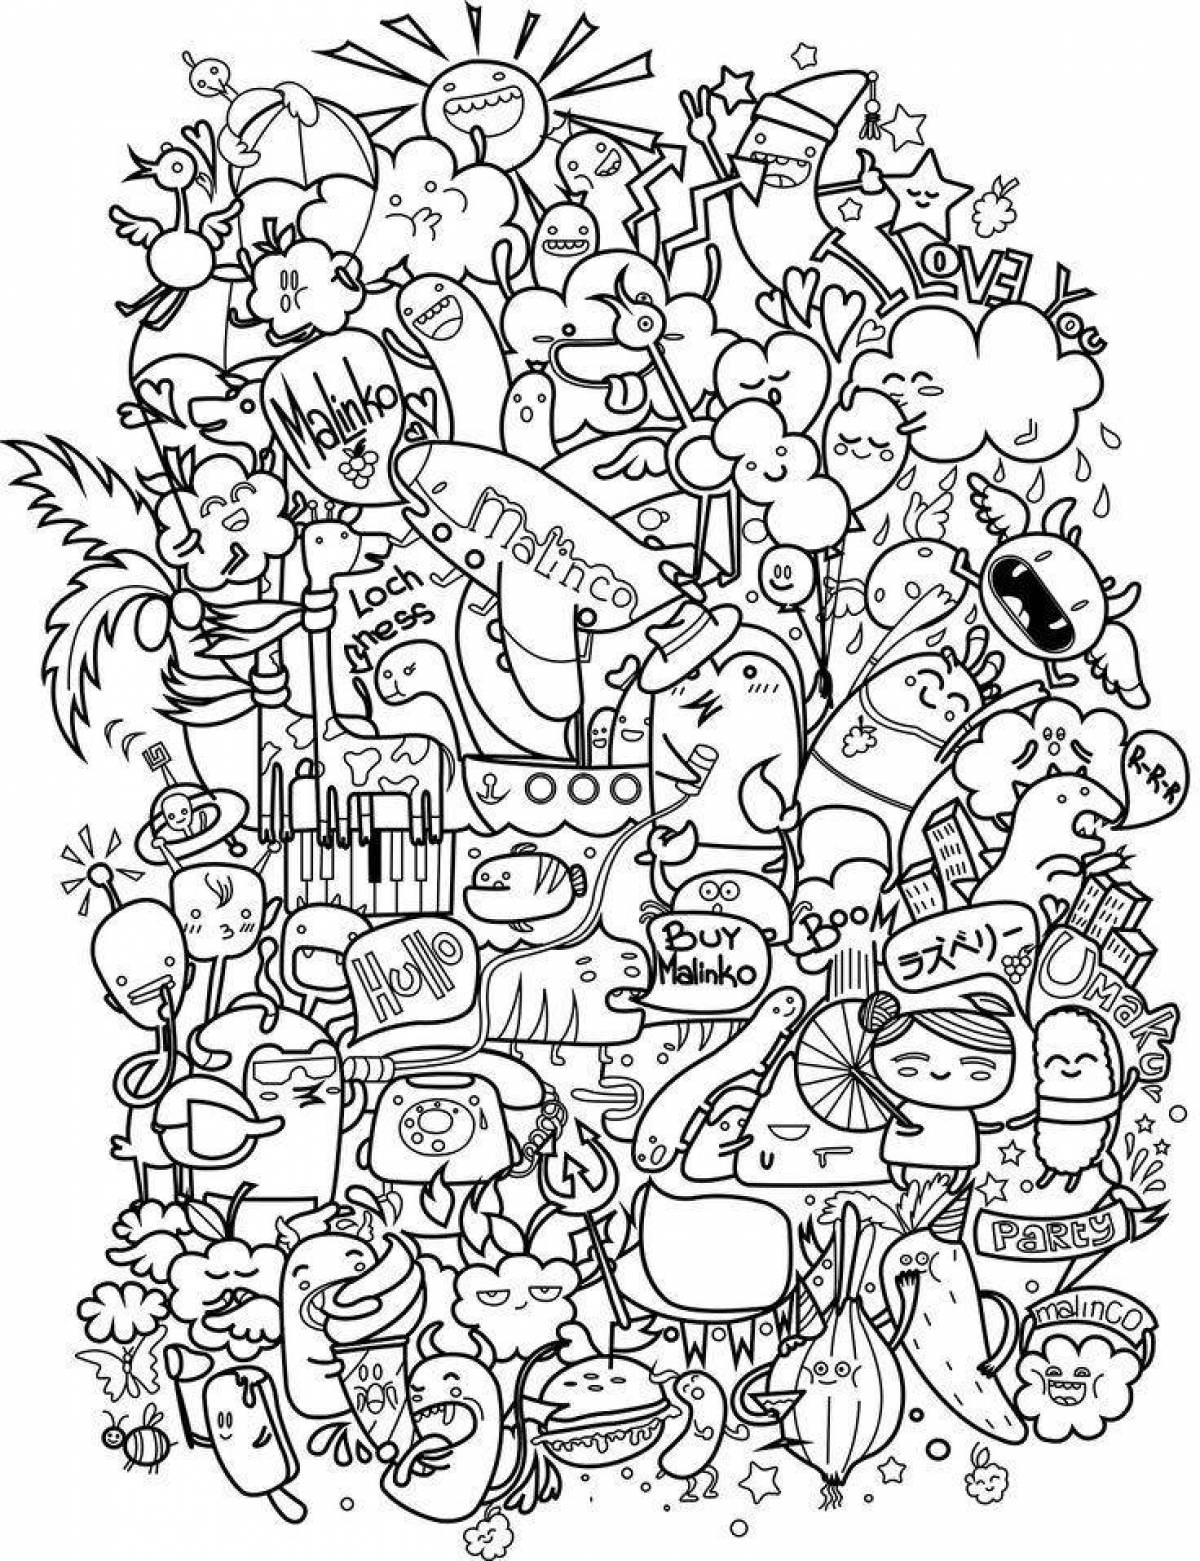 Colorful scribble coloring page